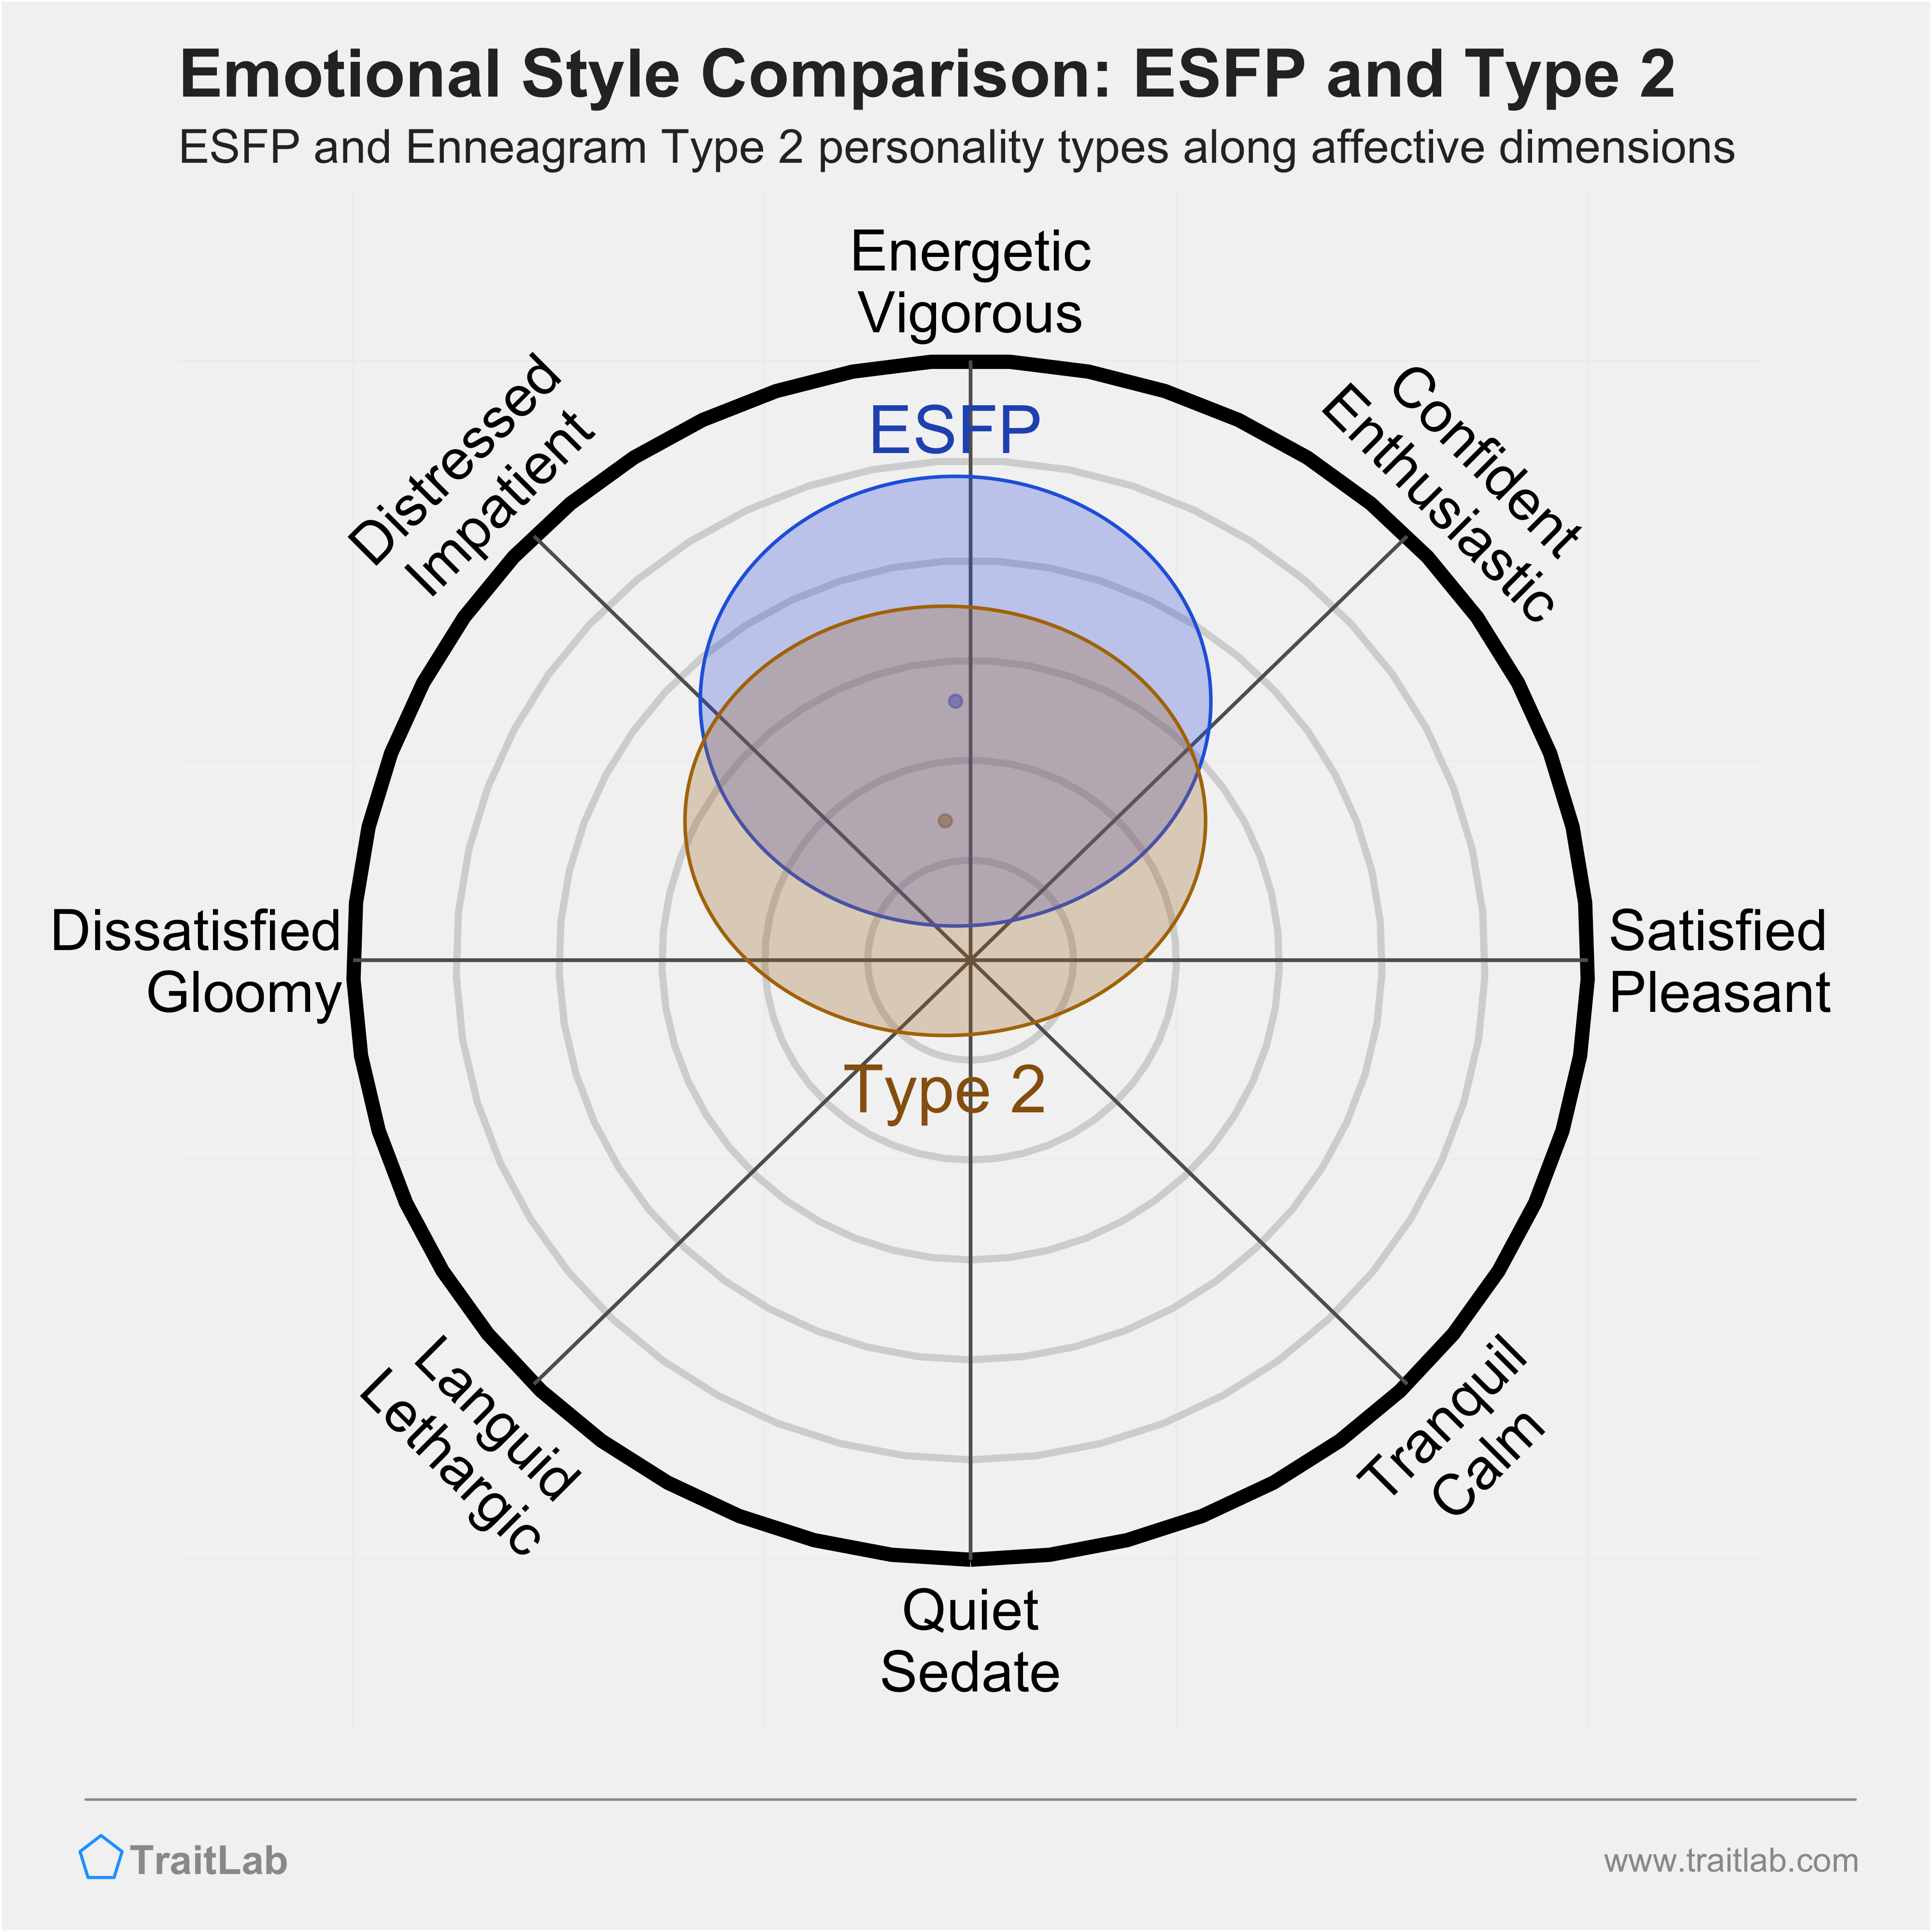 ESFP and Type 2 comparison across emotional (affective) dimensions